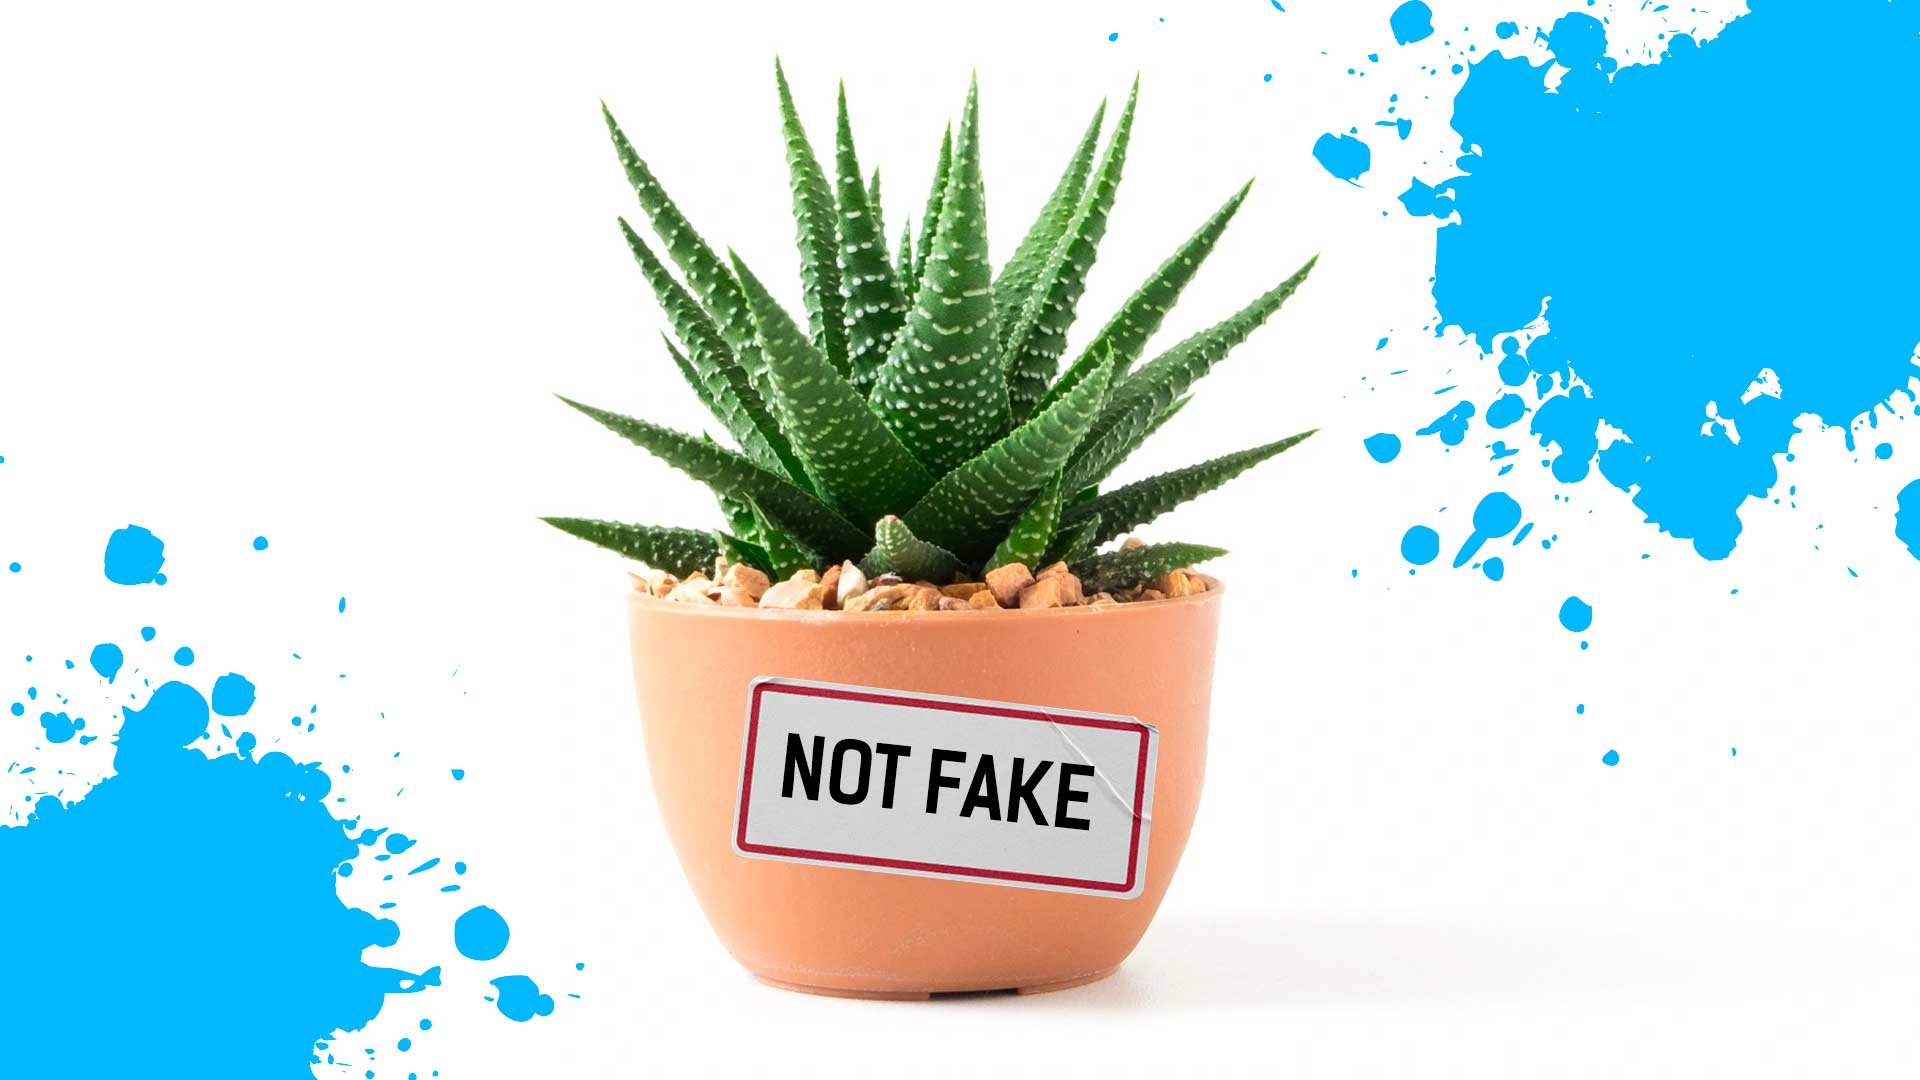 Not a fake plant